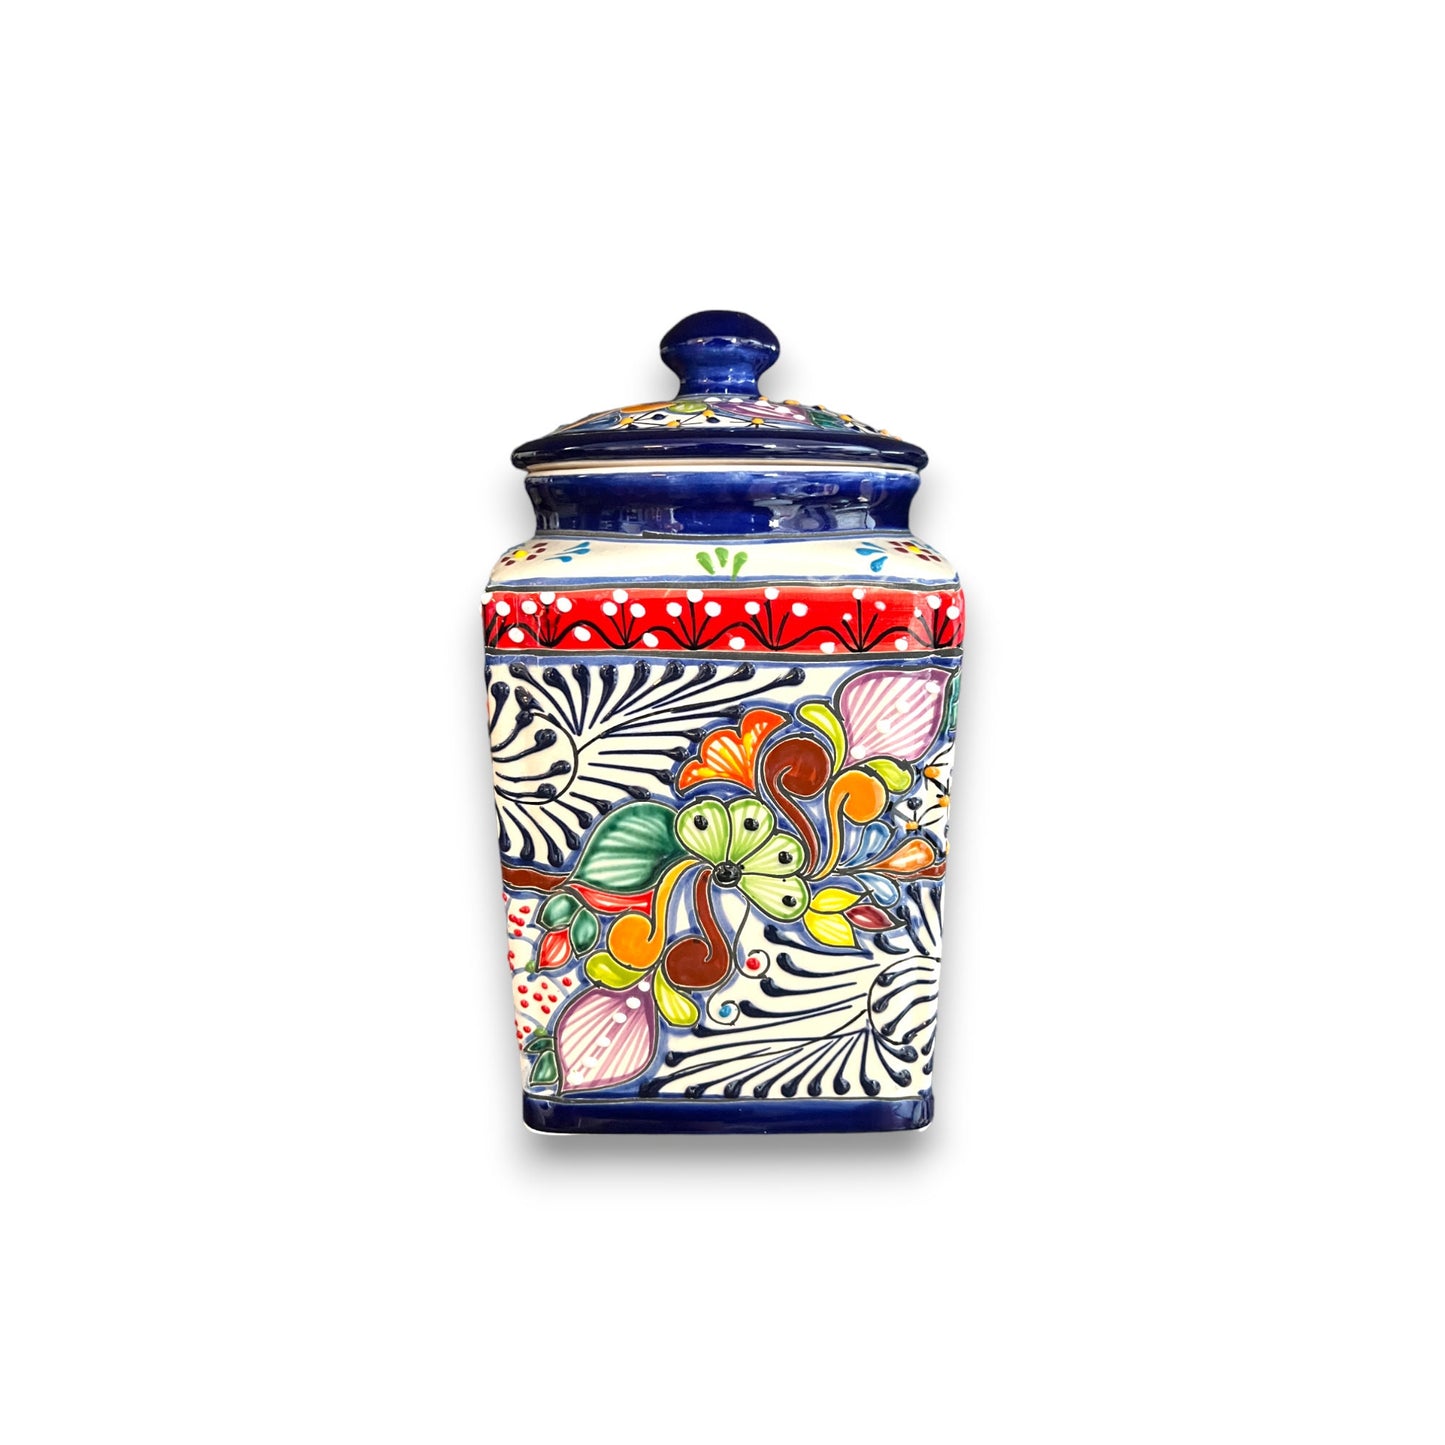 Set of 3 Dark Blue Talavera Canisters | Handcrafted Mexican Pottery from Puebla